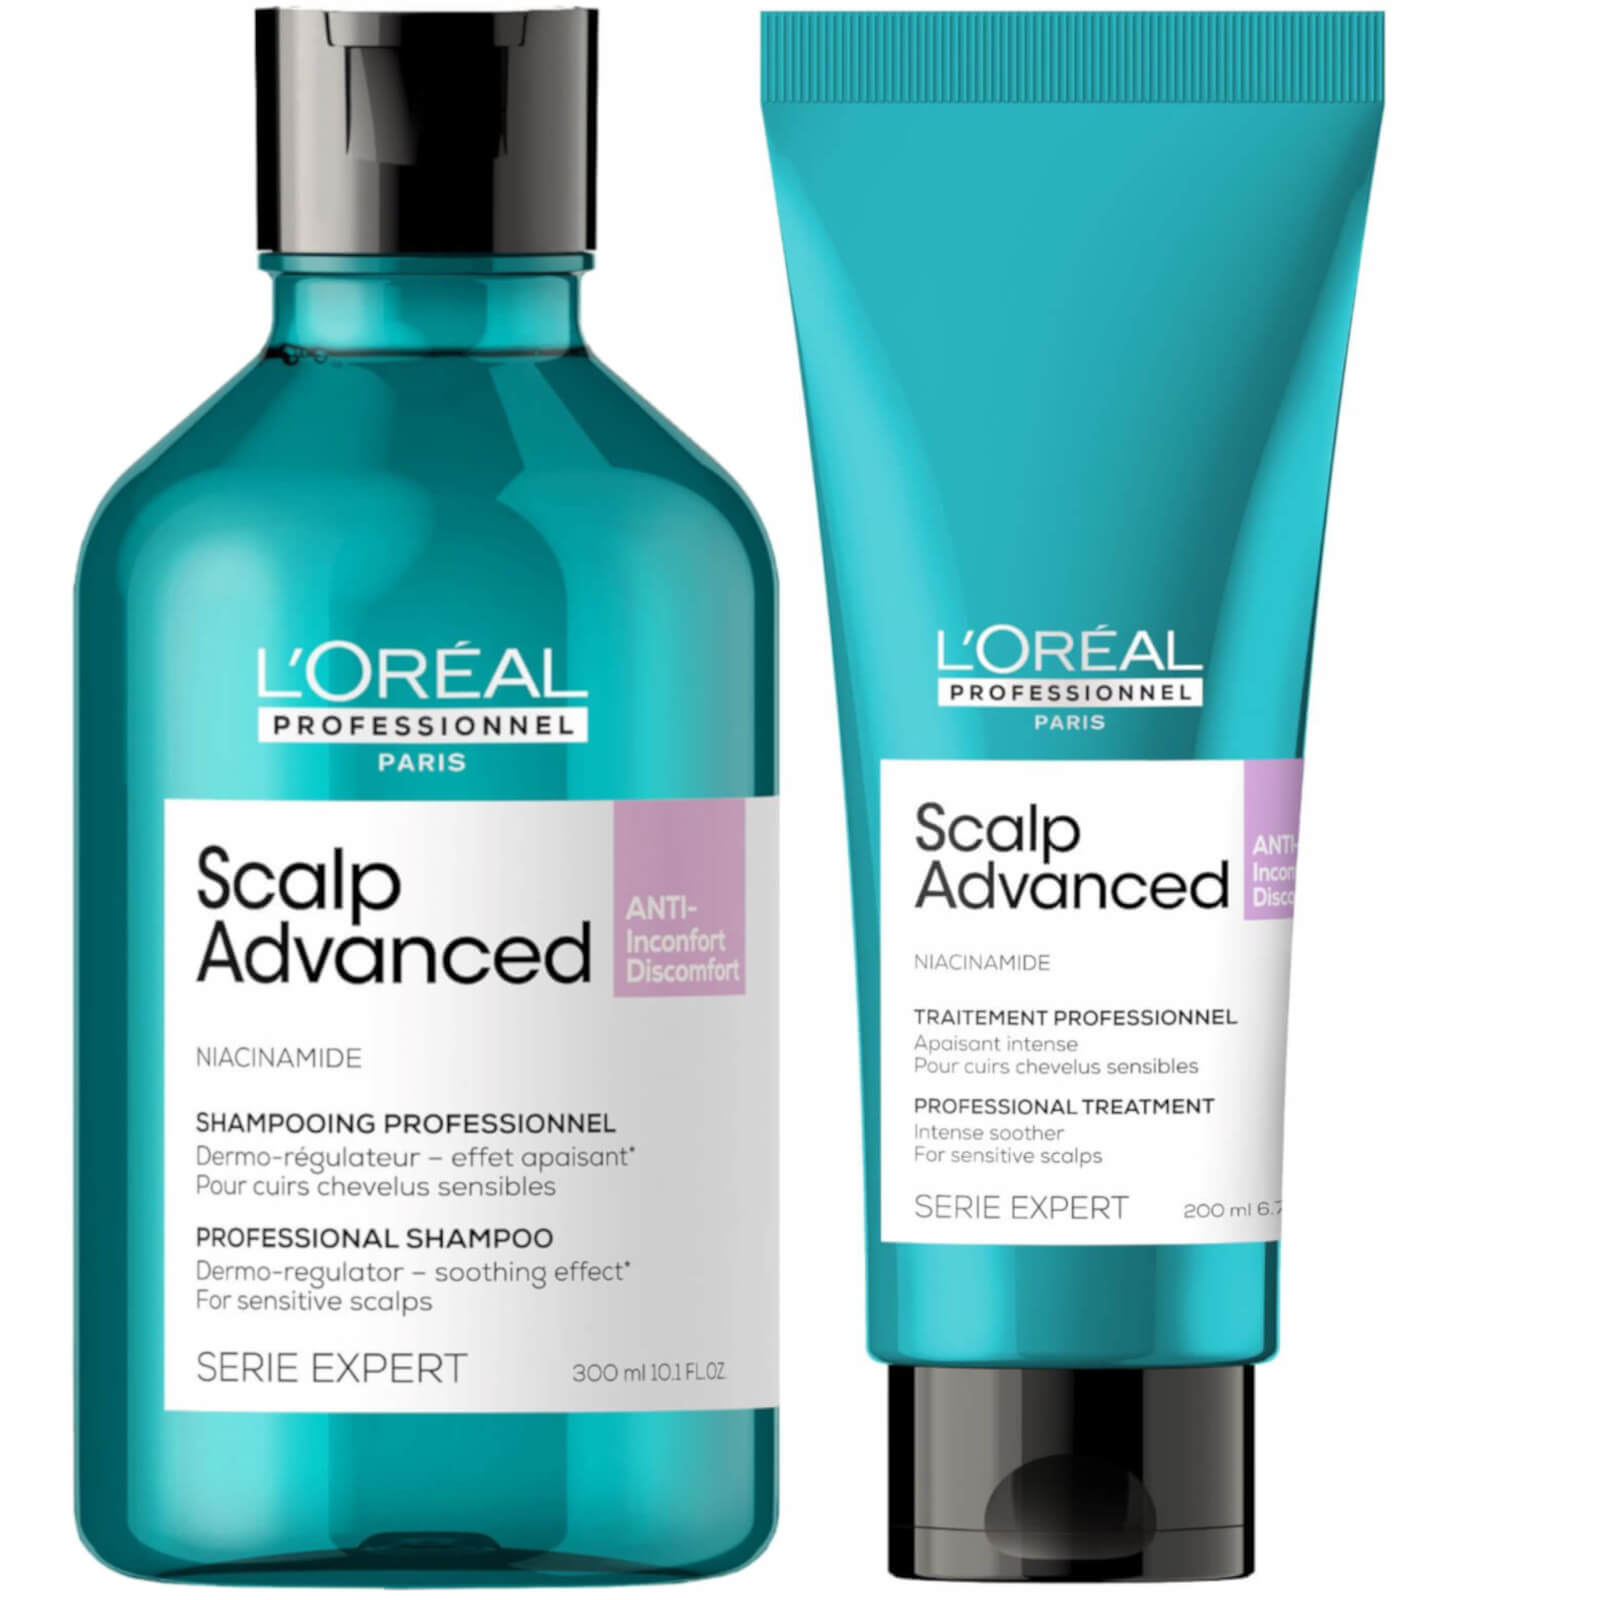 L'Oreal Professionnel Serie Expert Scalp Advanced Anti-Discomfort Hair Shampoo and Treatment Duo